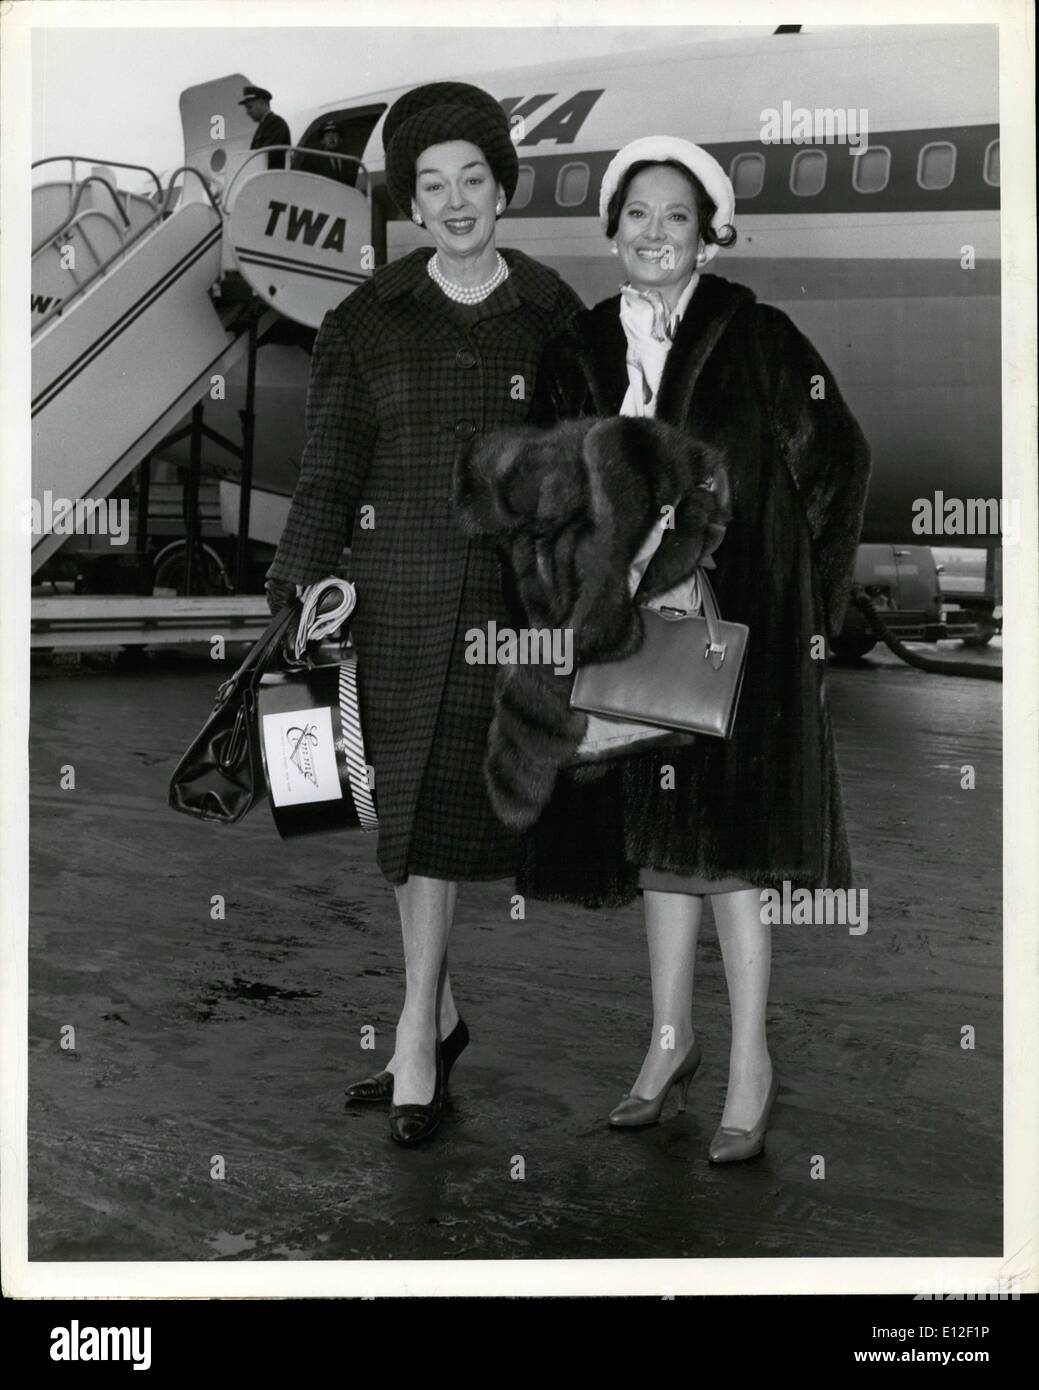 Dec. 21, 2011 - Two of Hollywood's great names Rosalind Russell, Left, and Merle Oberon Grace the Cameraman's lens as they prepare to board a TWA Super jet for Los Angeles. Miss Russell, who is Mrs. Fred Brisson in real life, was in town for her producer-Husband's Broadway opening of ''Under the Yum Yum tree''. Miss Oberon, married to wealthy European Businessman Bruno Pagliai will make her home in Hollywood for awhile after living on the continent. Stock Photo